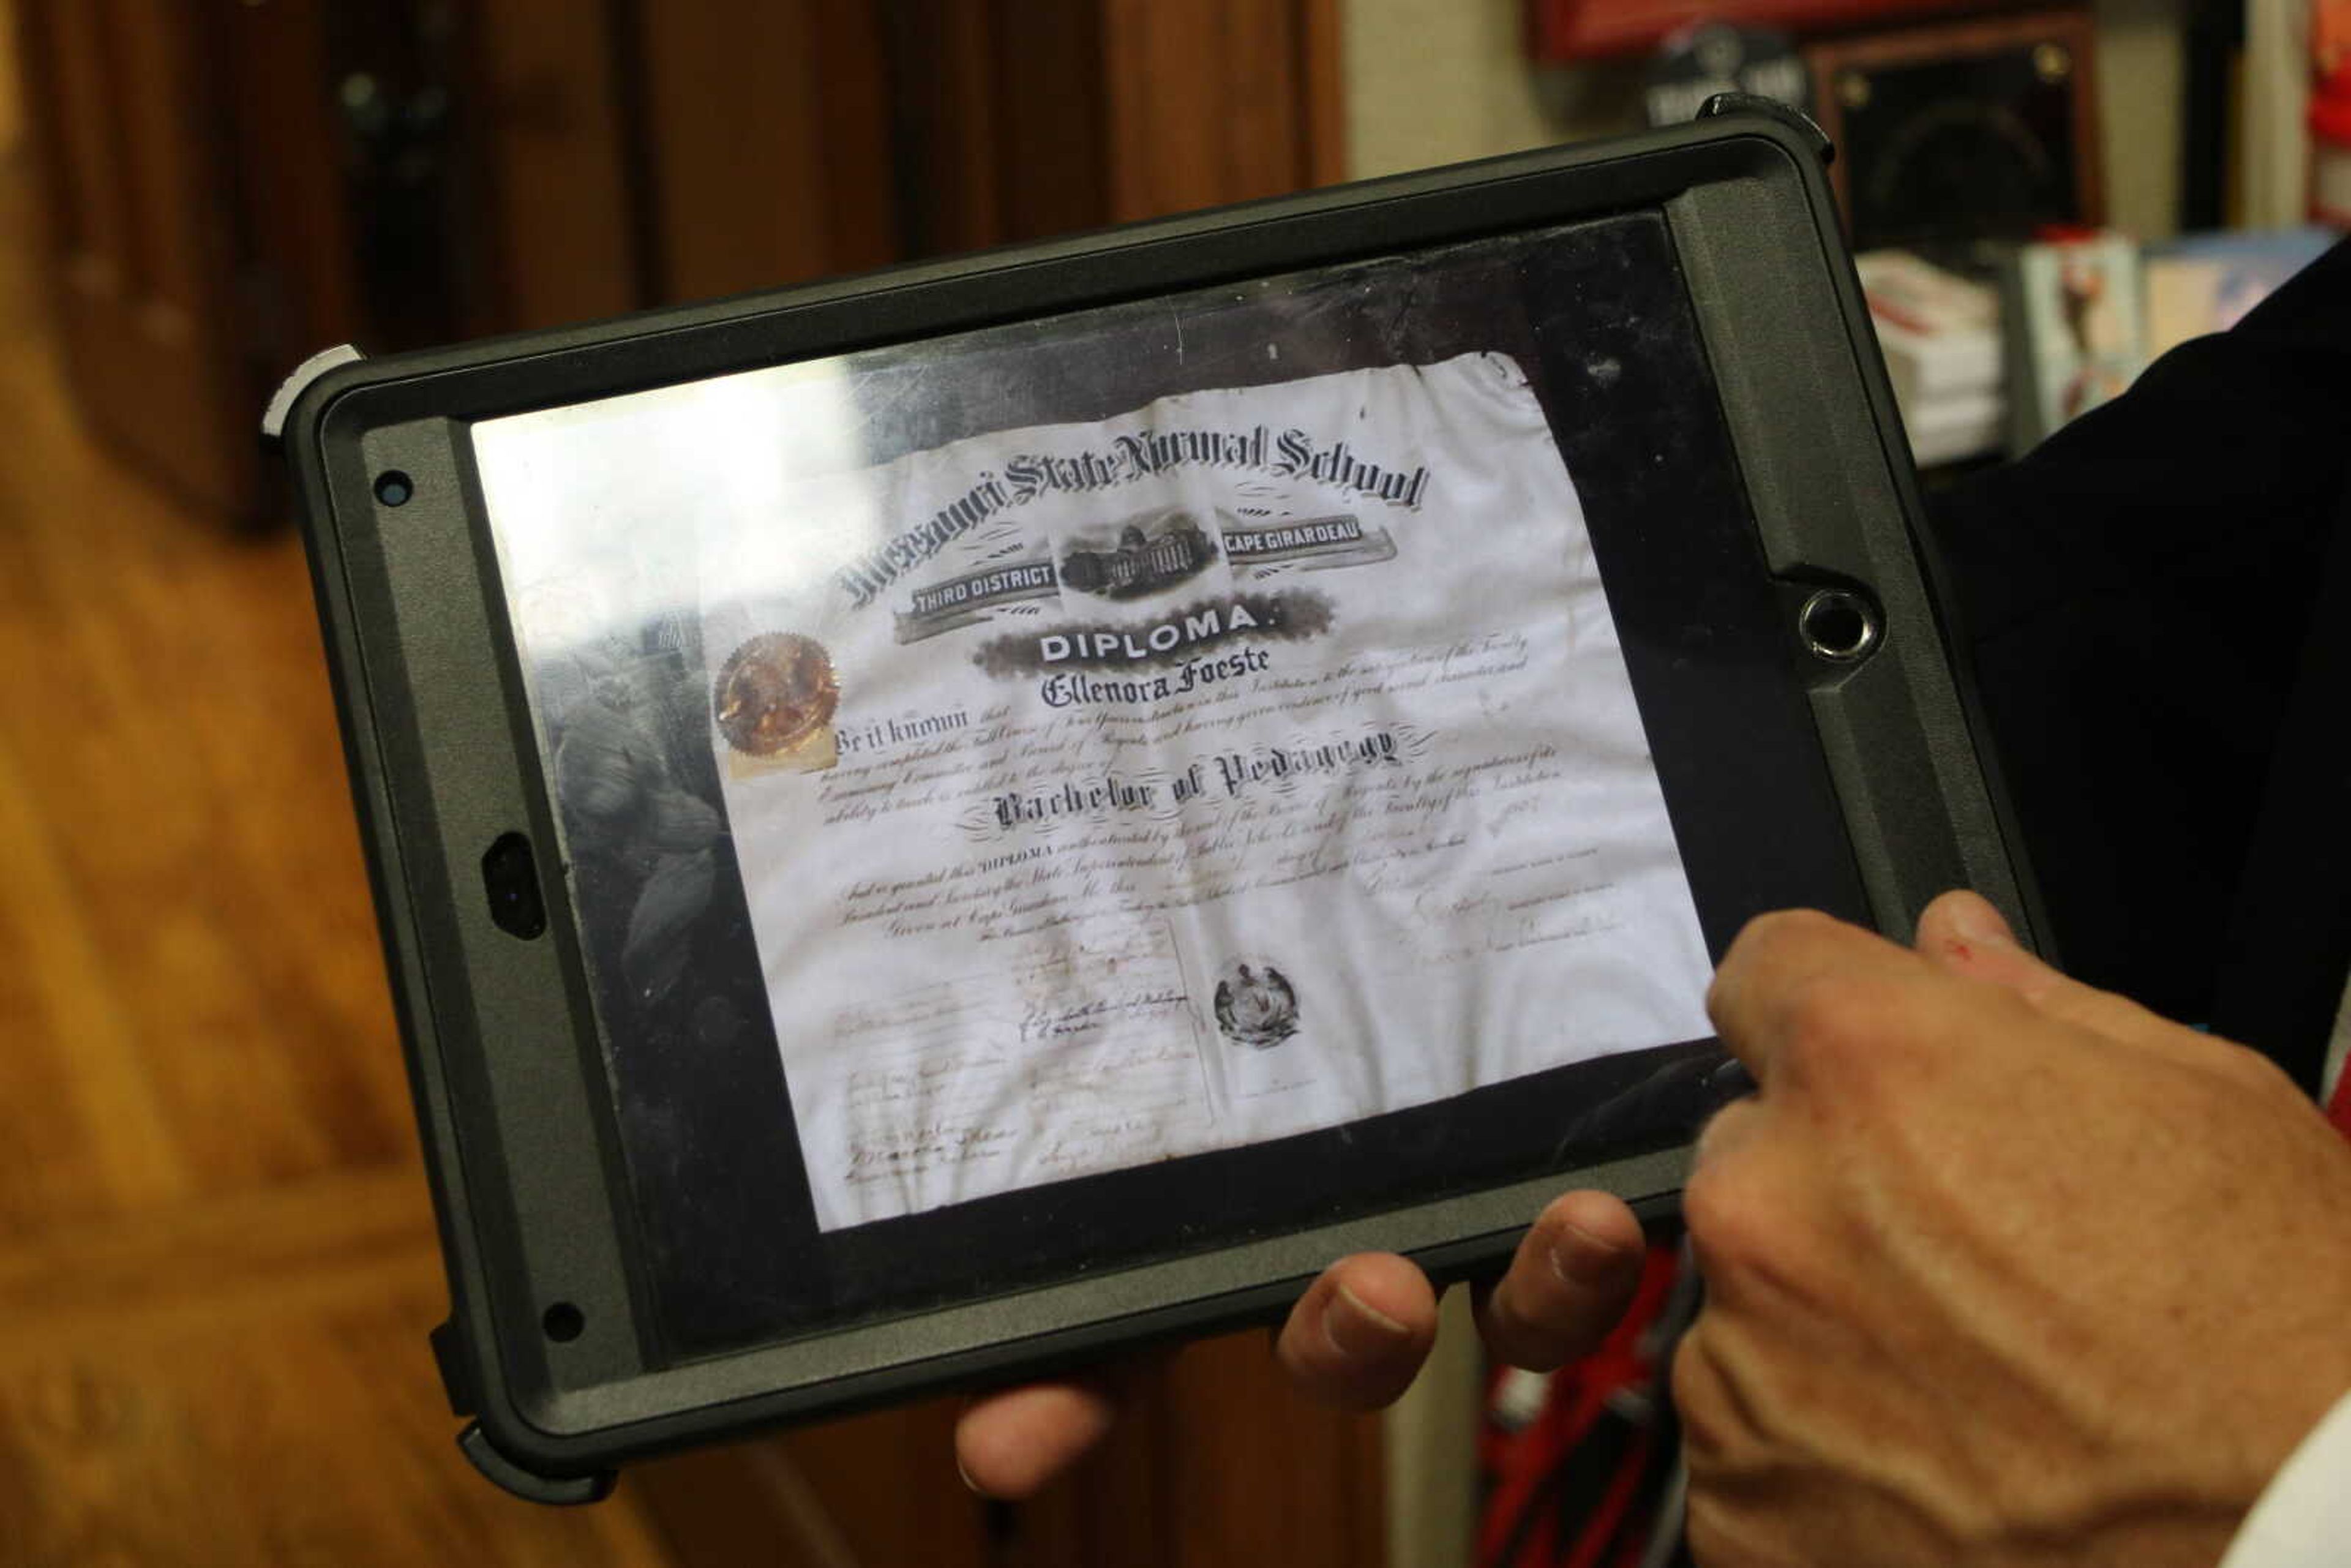 Jay Wolz shows a photo of a diploma he found and brought for $15 at an aunqiue store. Wolz was able to track down the alum the diploma belong to and return it.